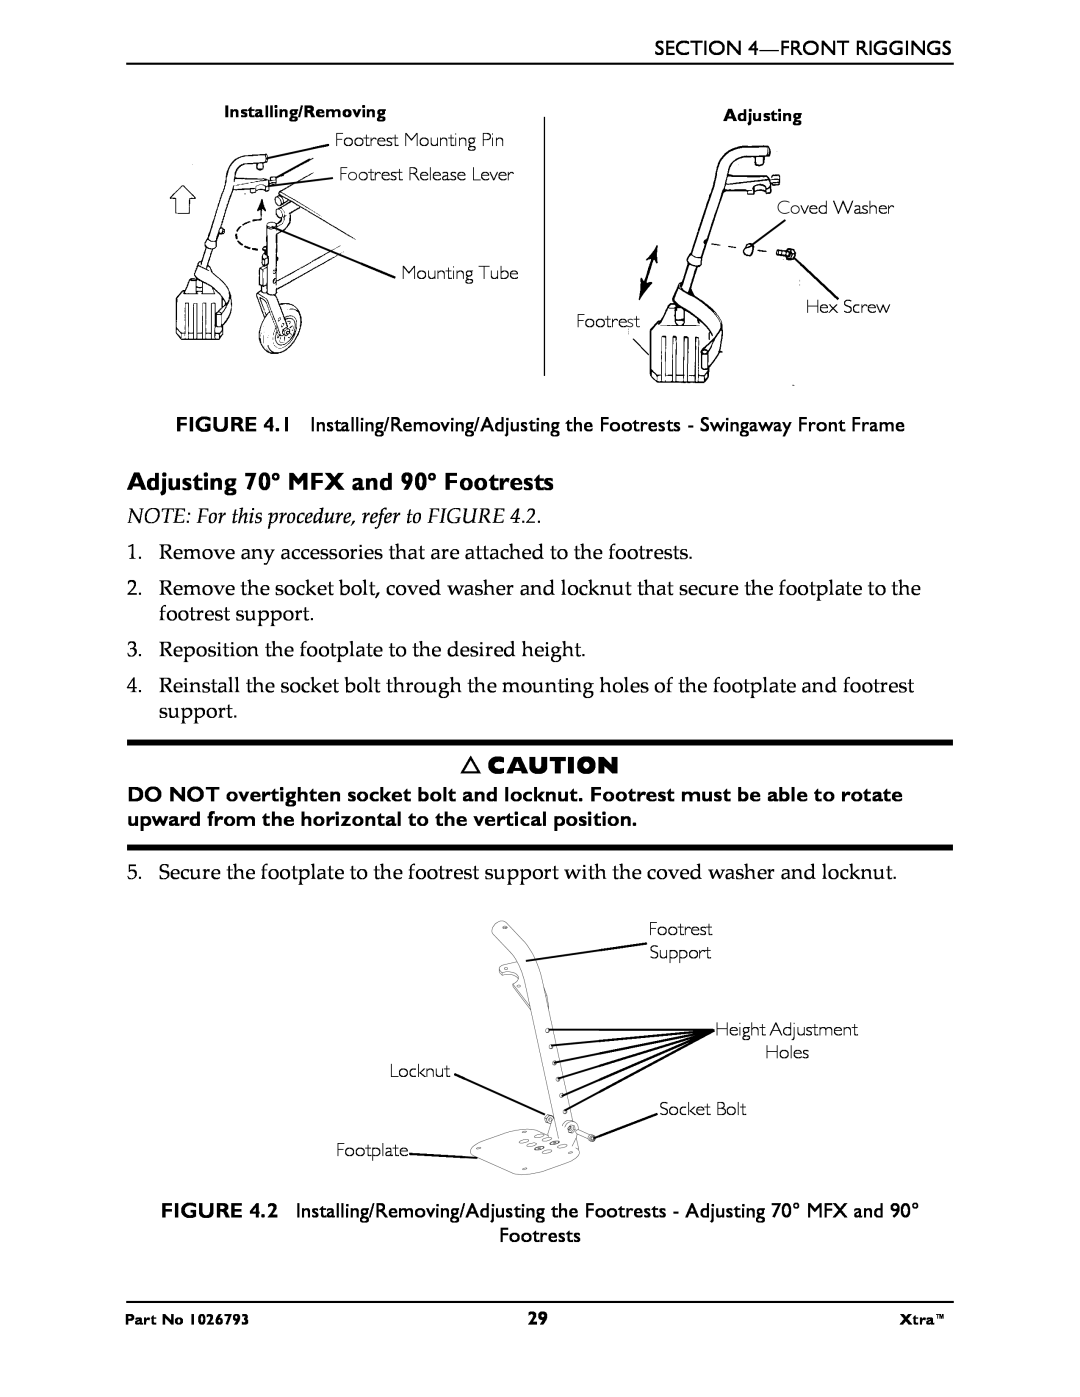 Invacare 1026793 manual Adjusting 70 MFX and 90 Footrests, NOTE For this procedure, refer to FIGURE 